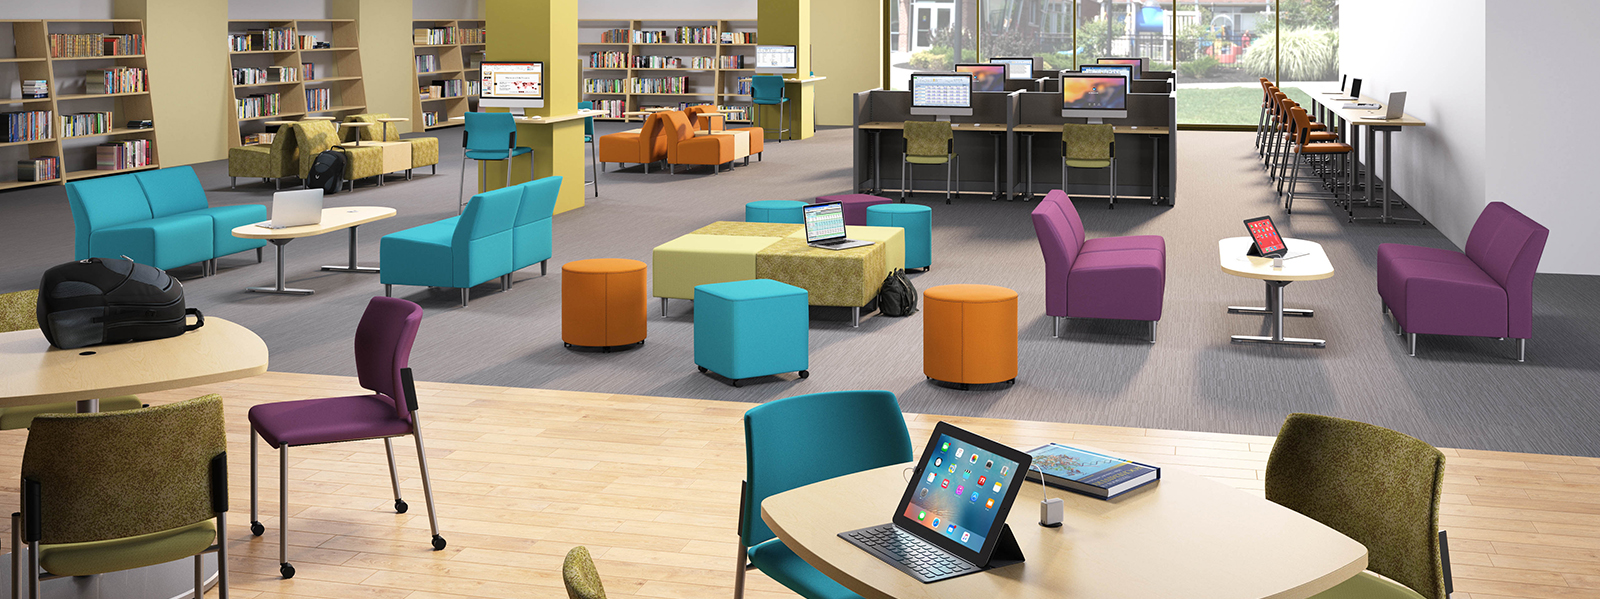 3D rendering of a clean and bright learning space